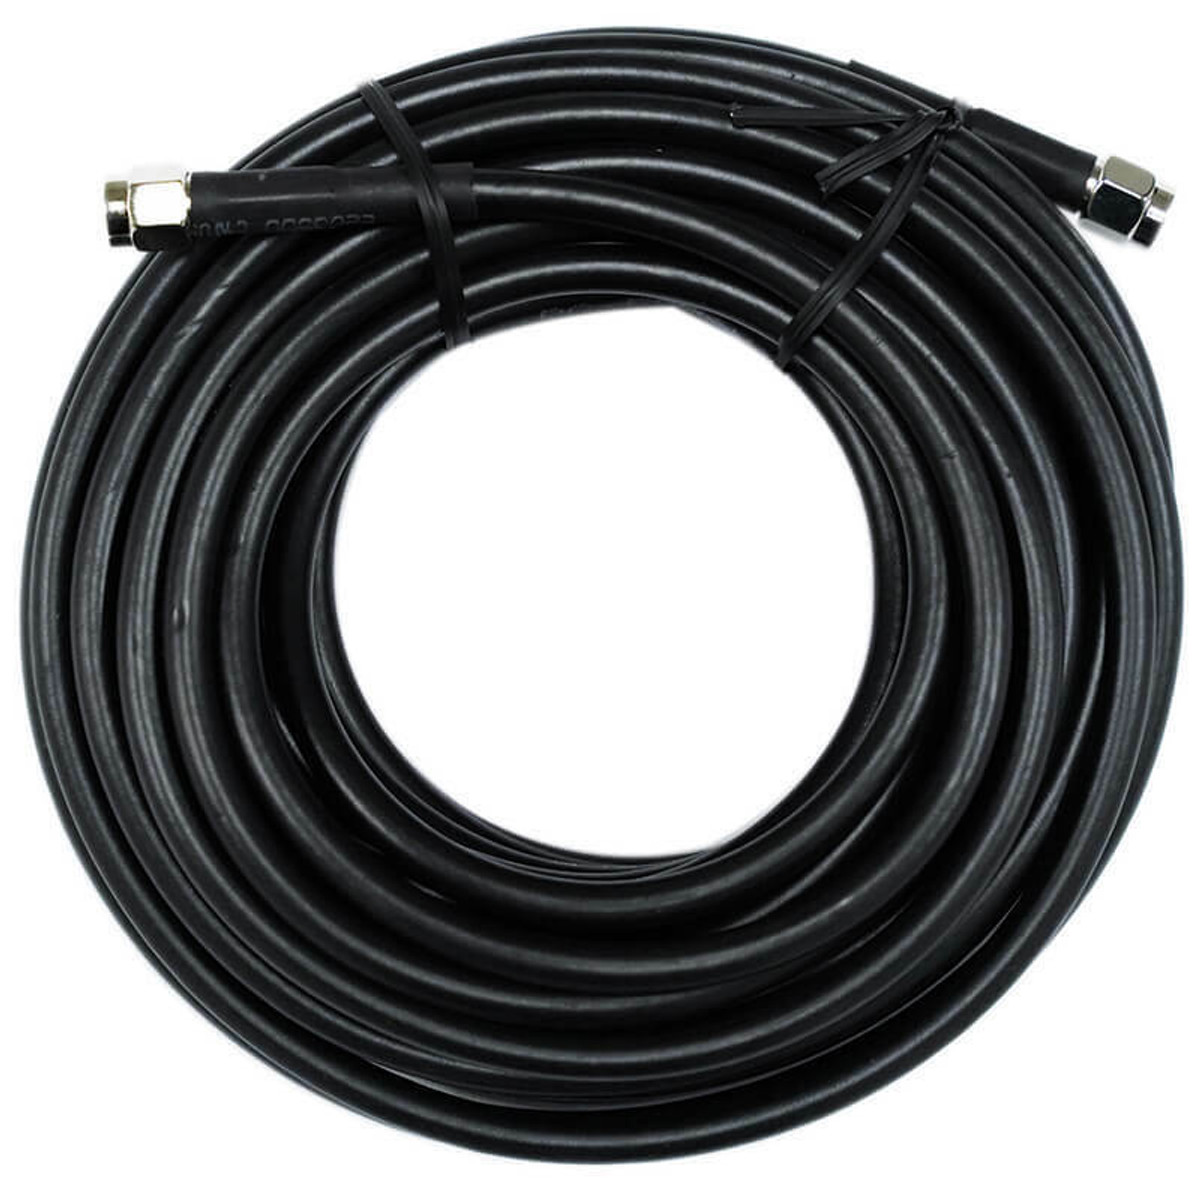 Wilson Electronics Wilson Electronics 25ft RG58 Cable SMA-Male/SMA-Male Connectors or 950623